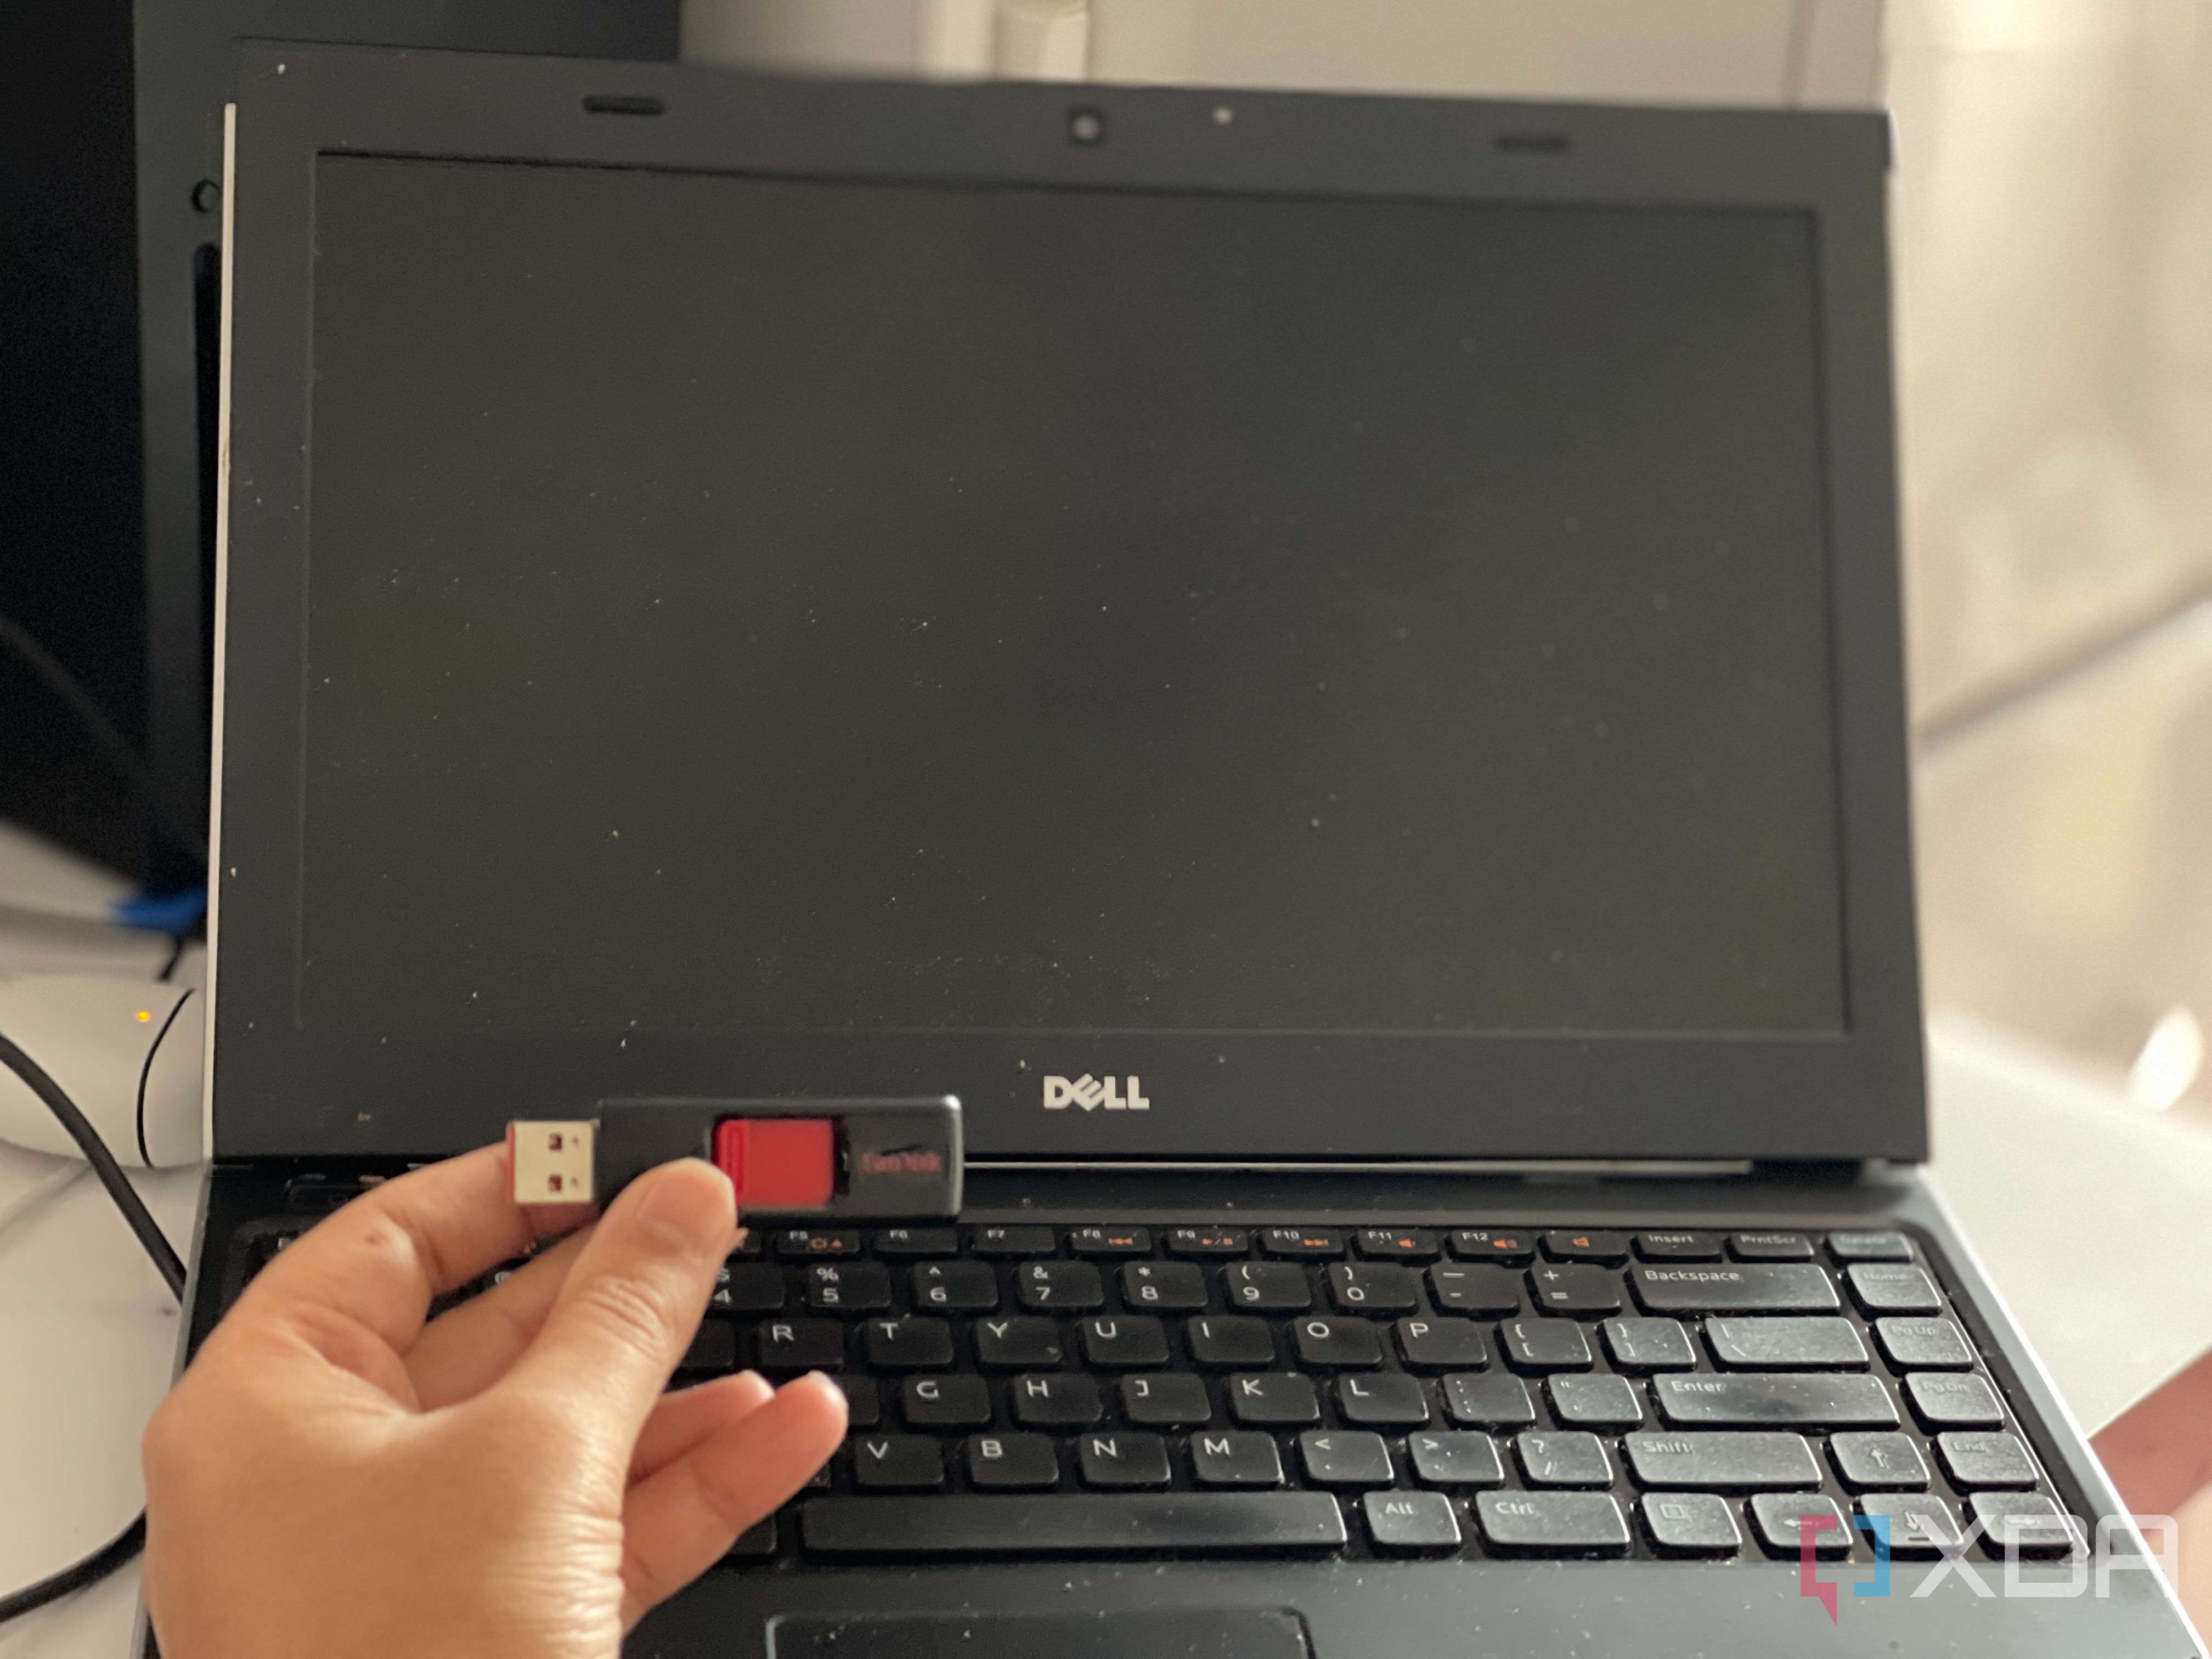 A Dell laptop with a USB drive